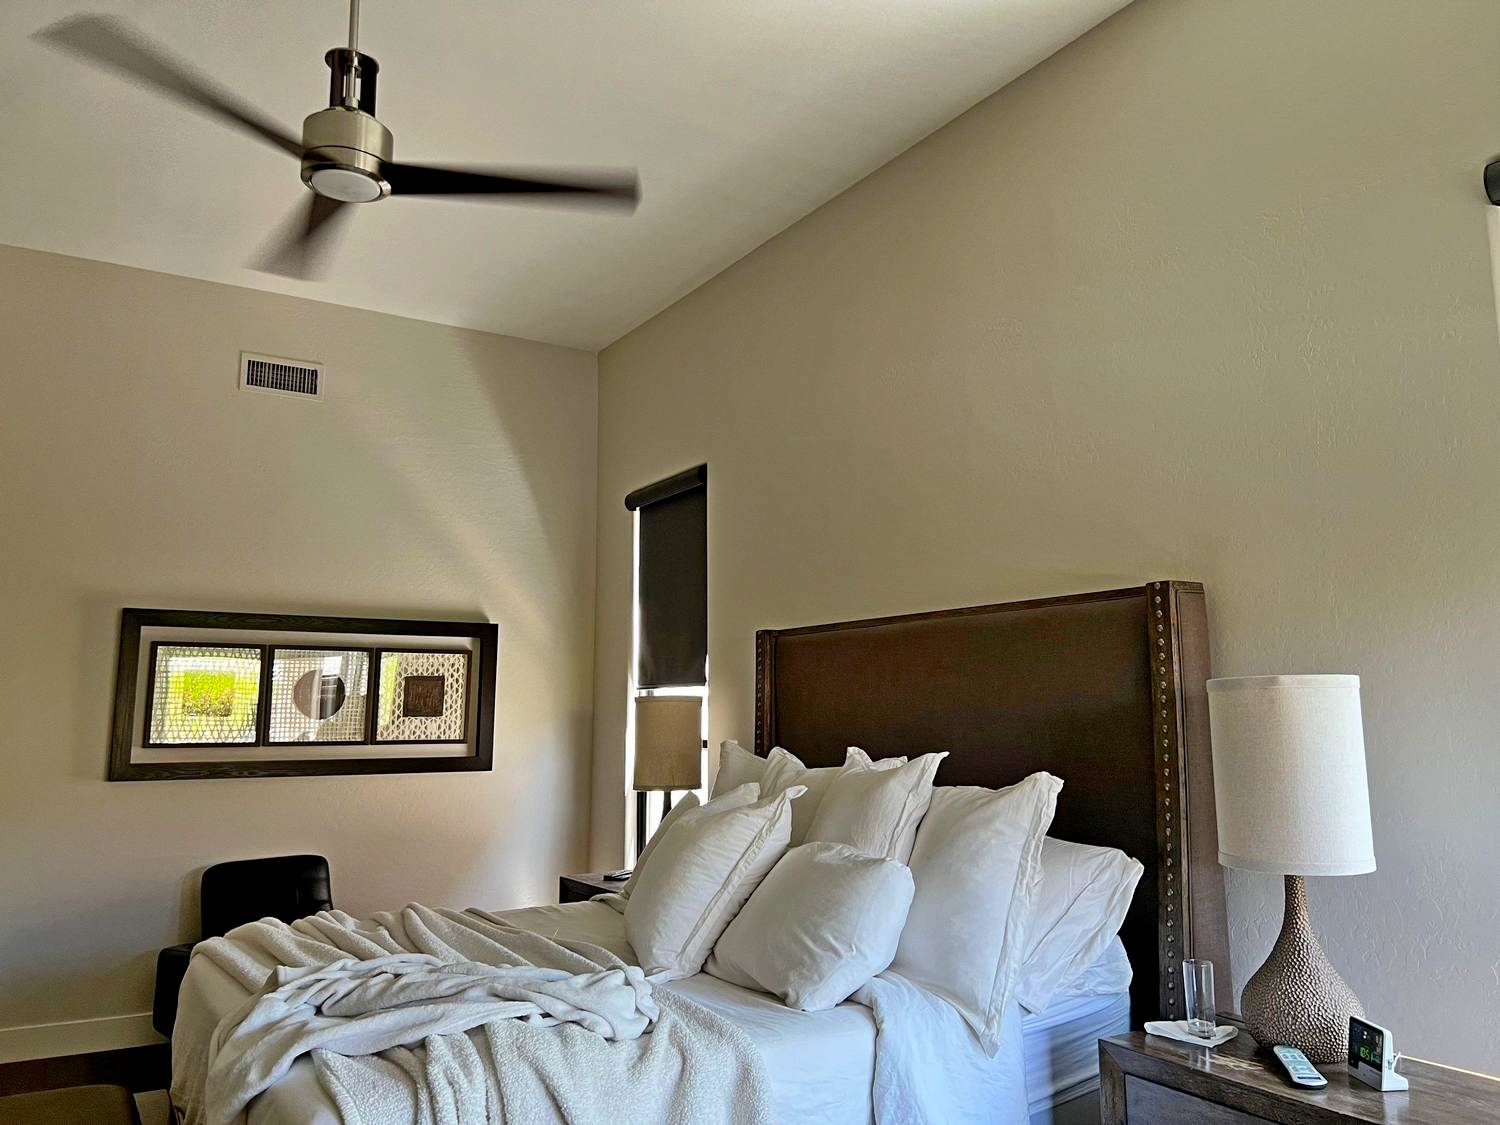 Interior Bedroom and Kitchen Cabinet Painting in Phoenix, AZ